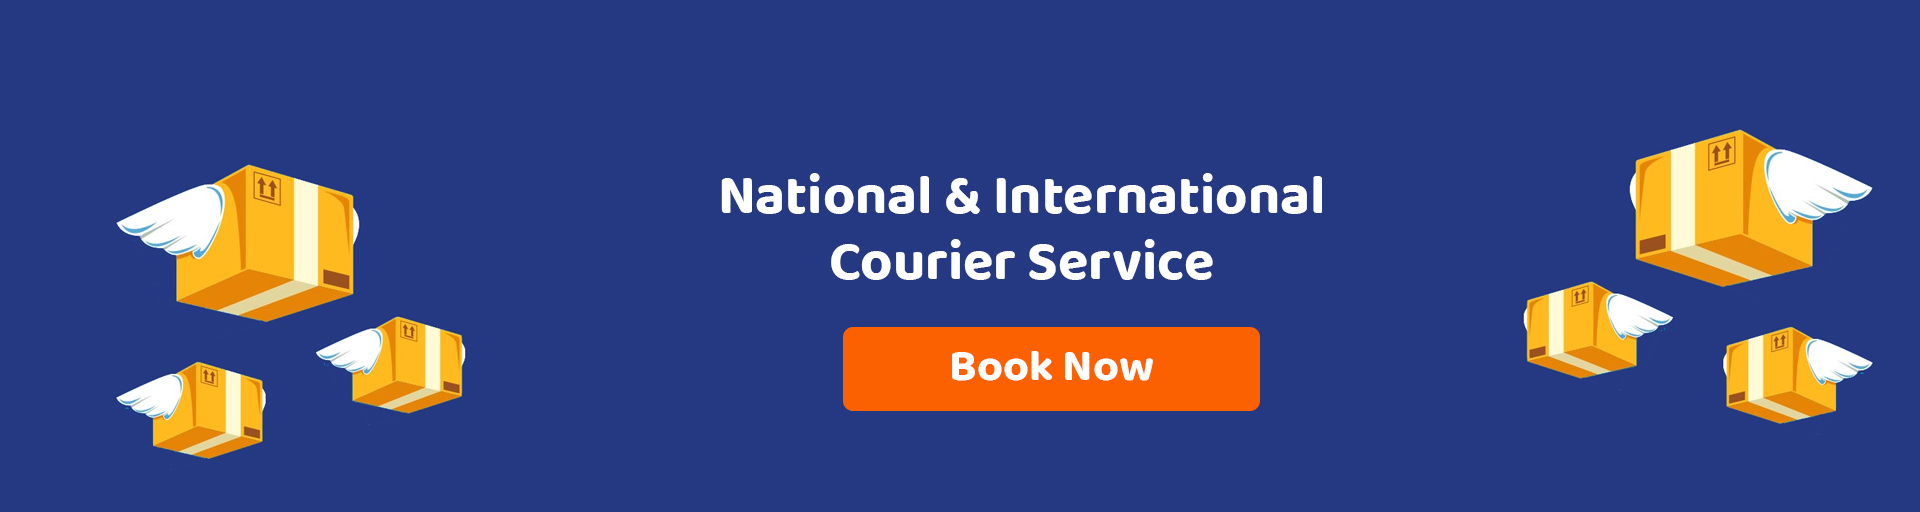 National and International Courier Service